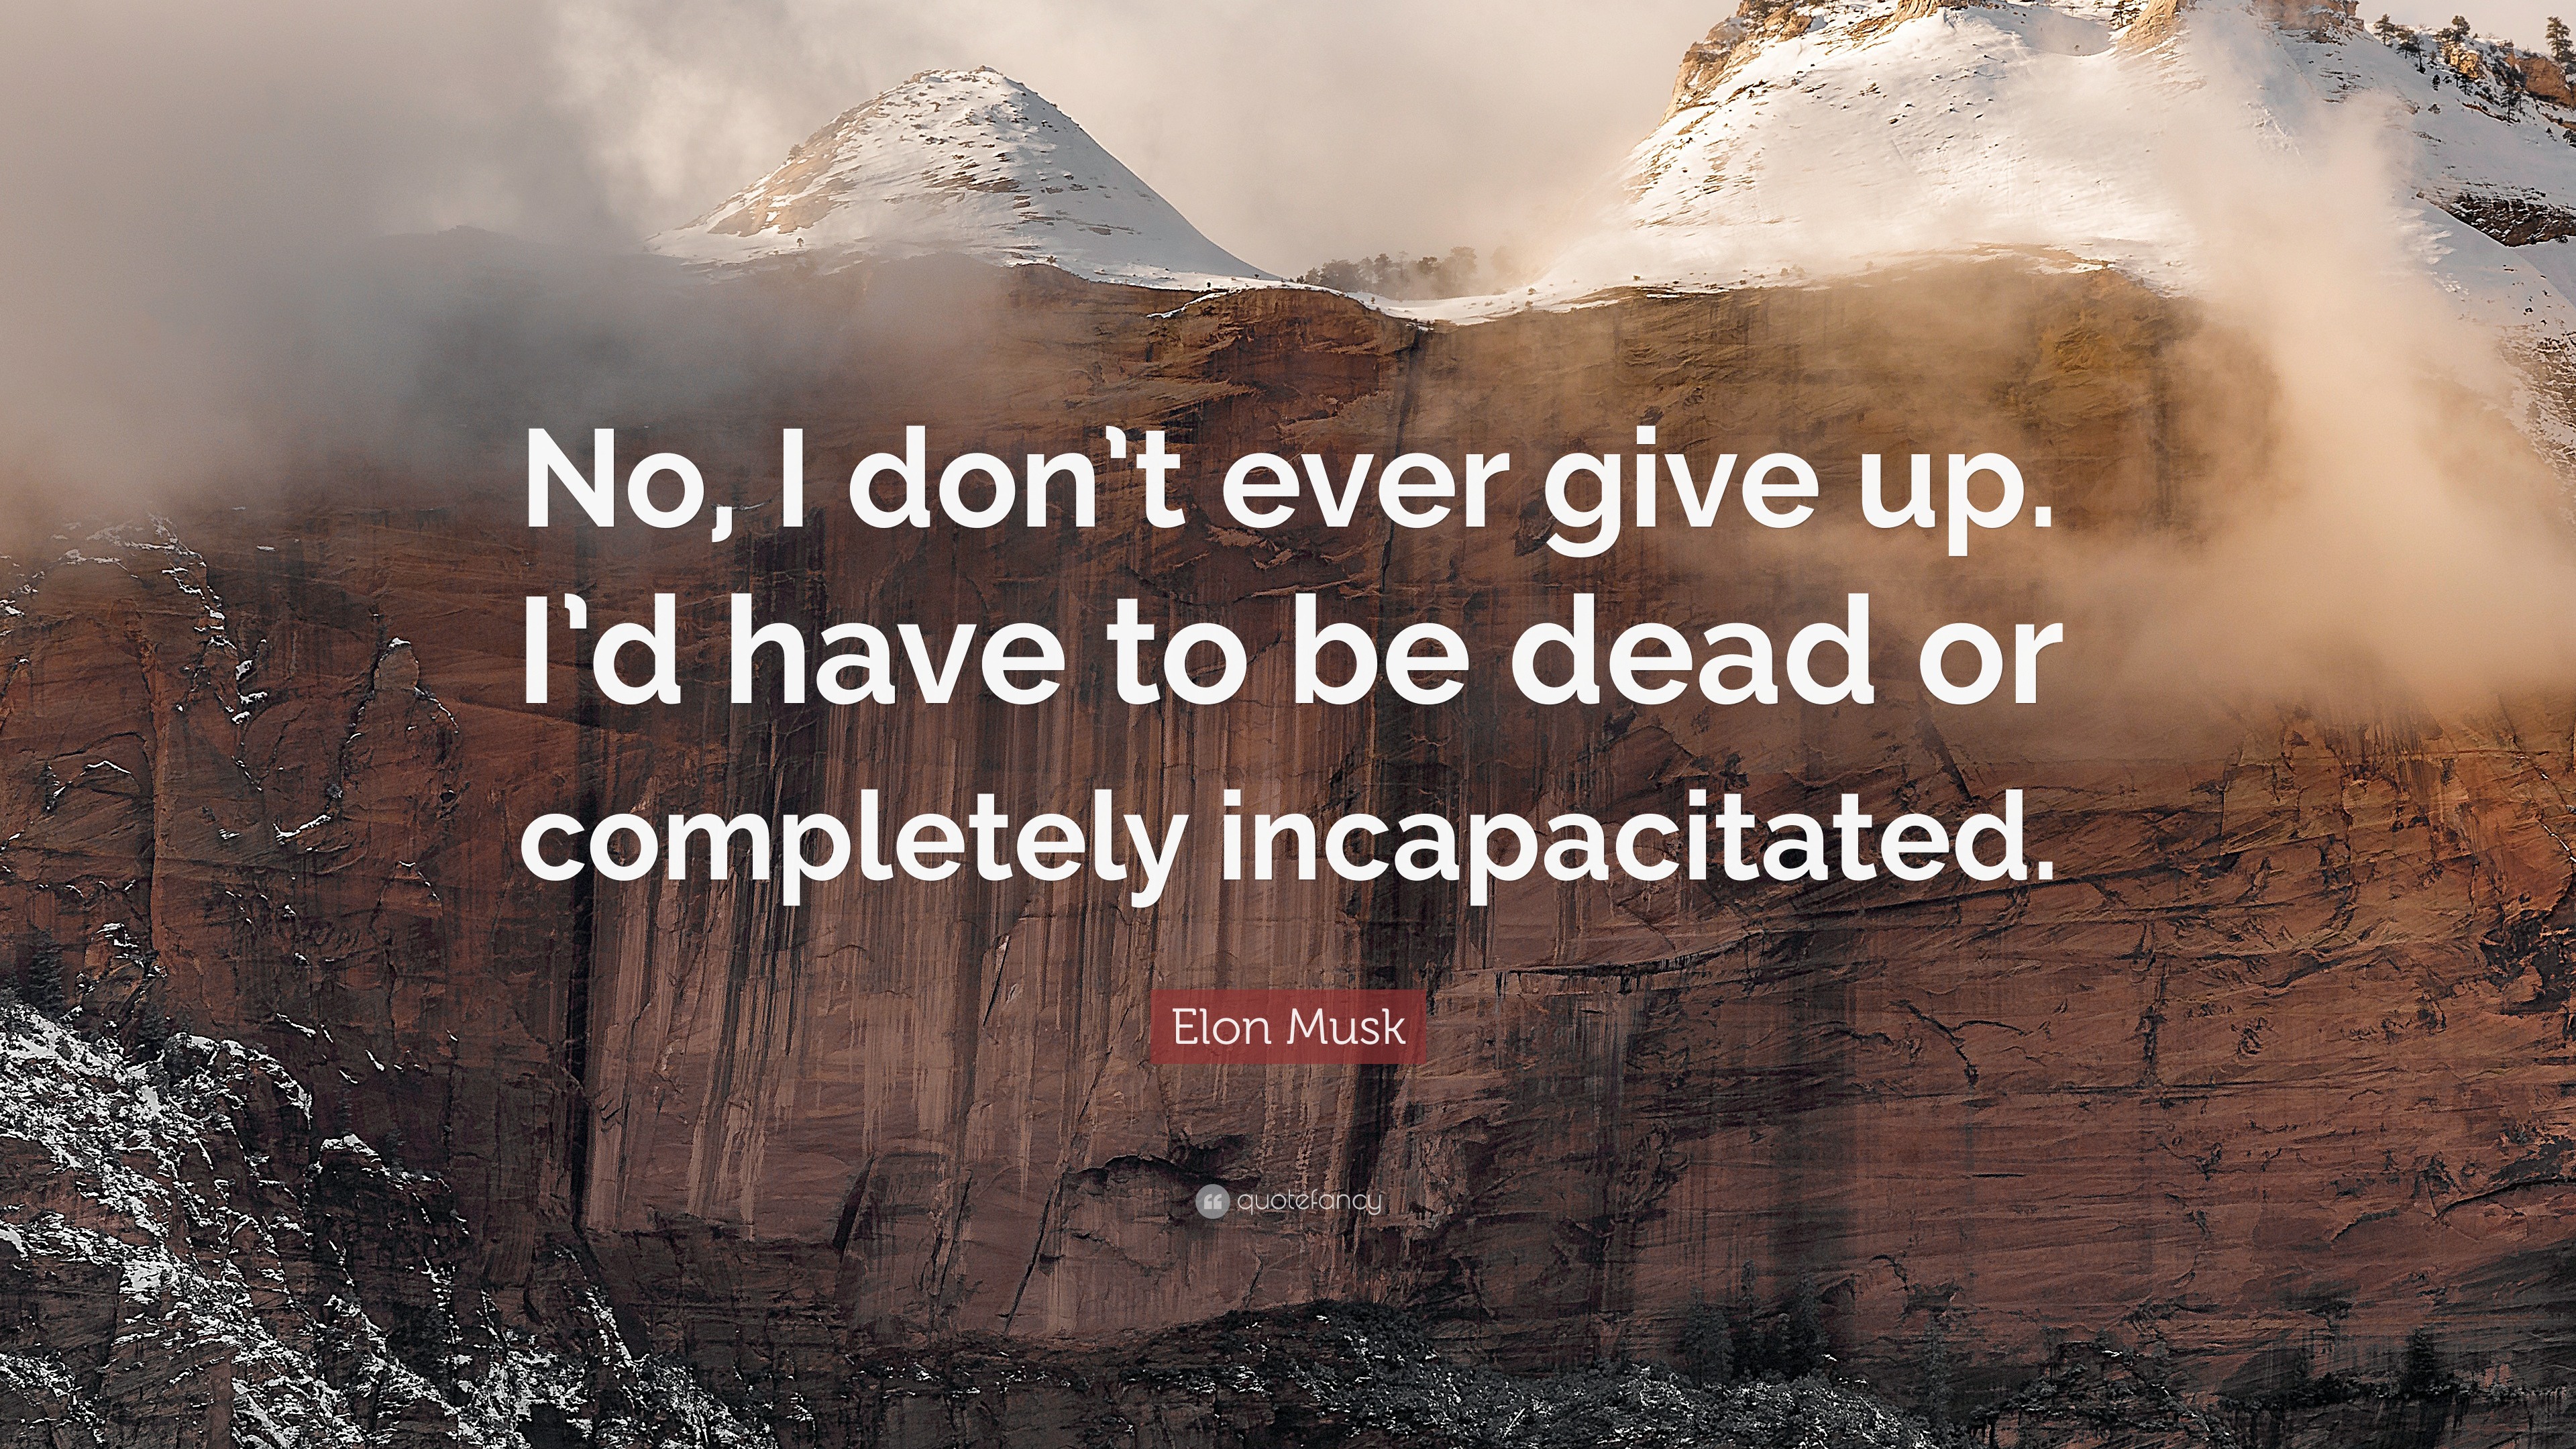 Elon Musk Quote “No I don t ever give up I